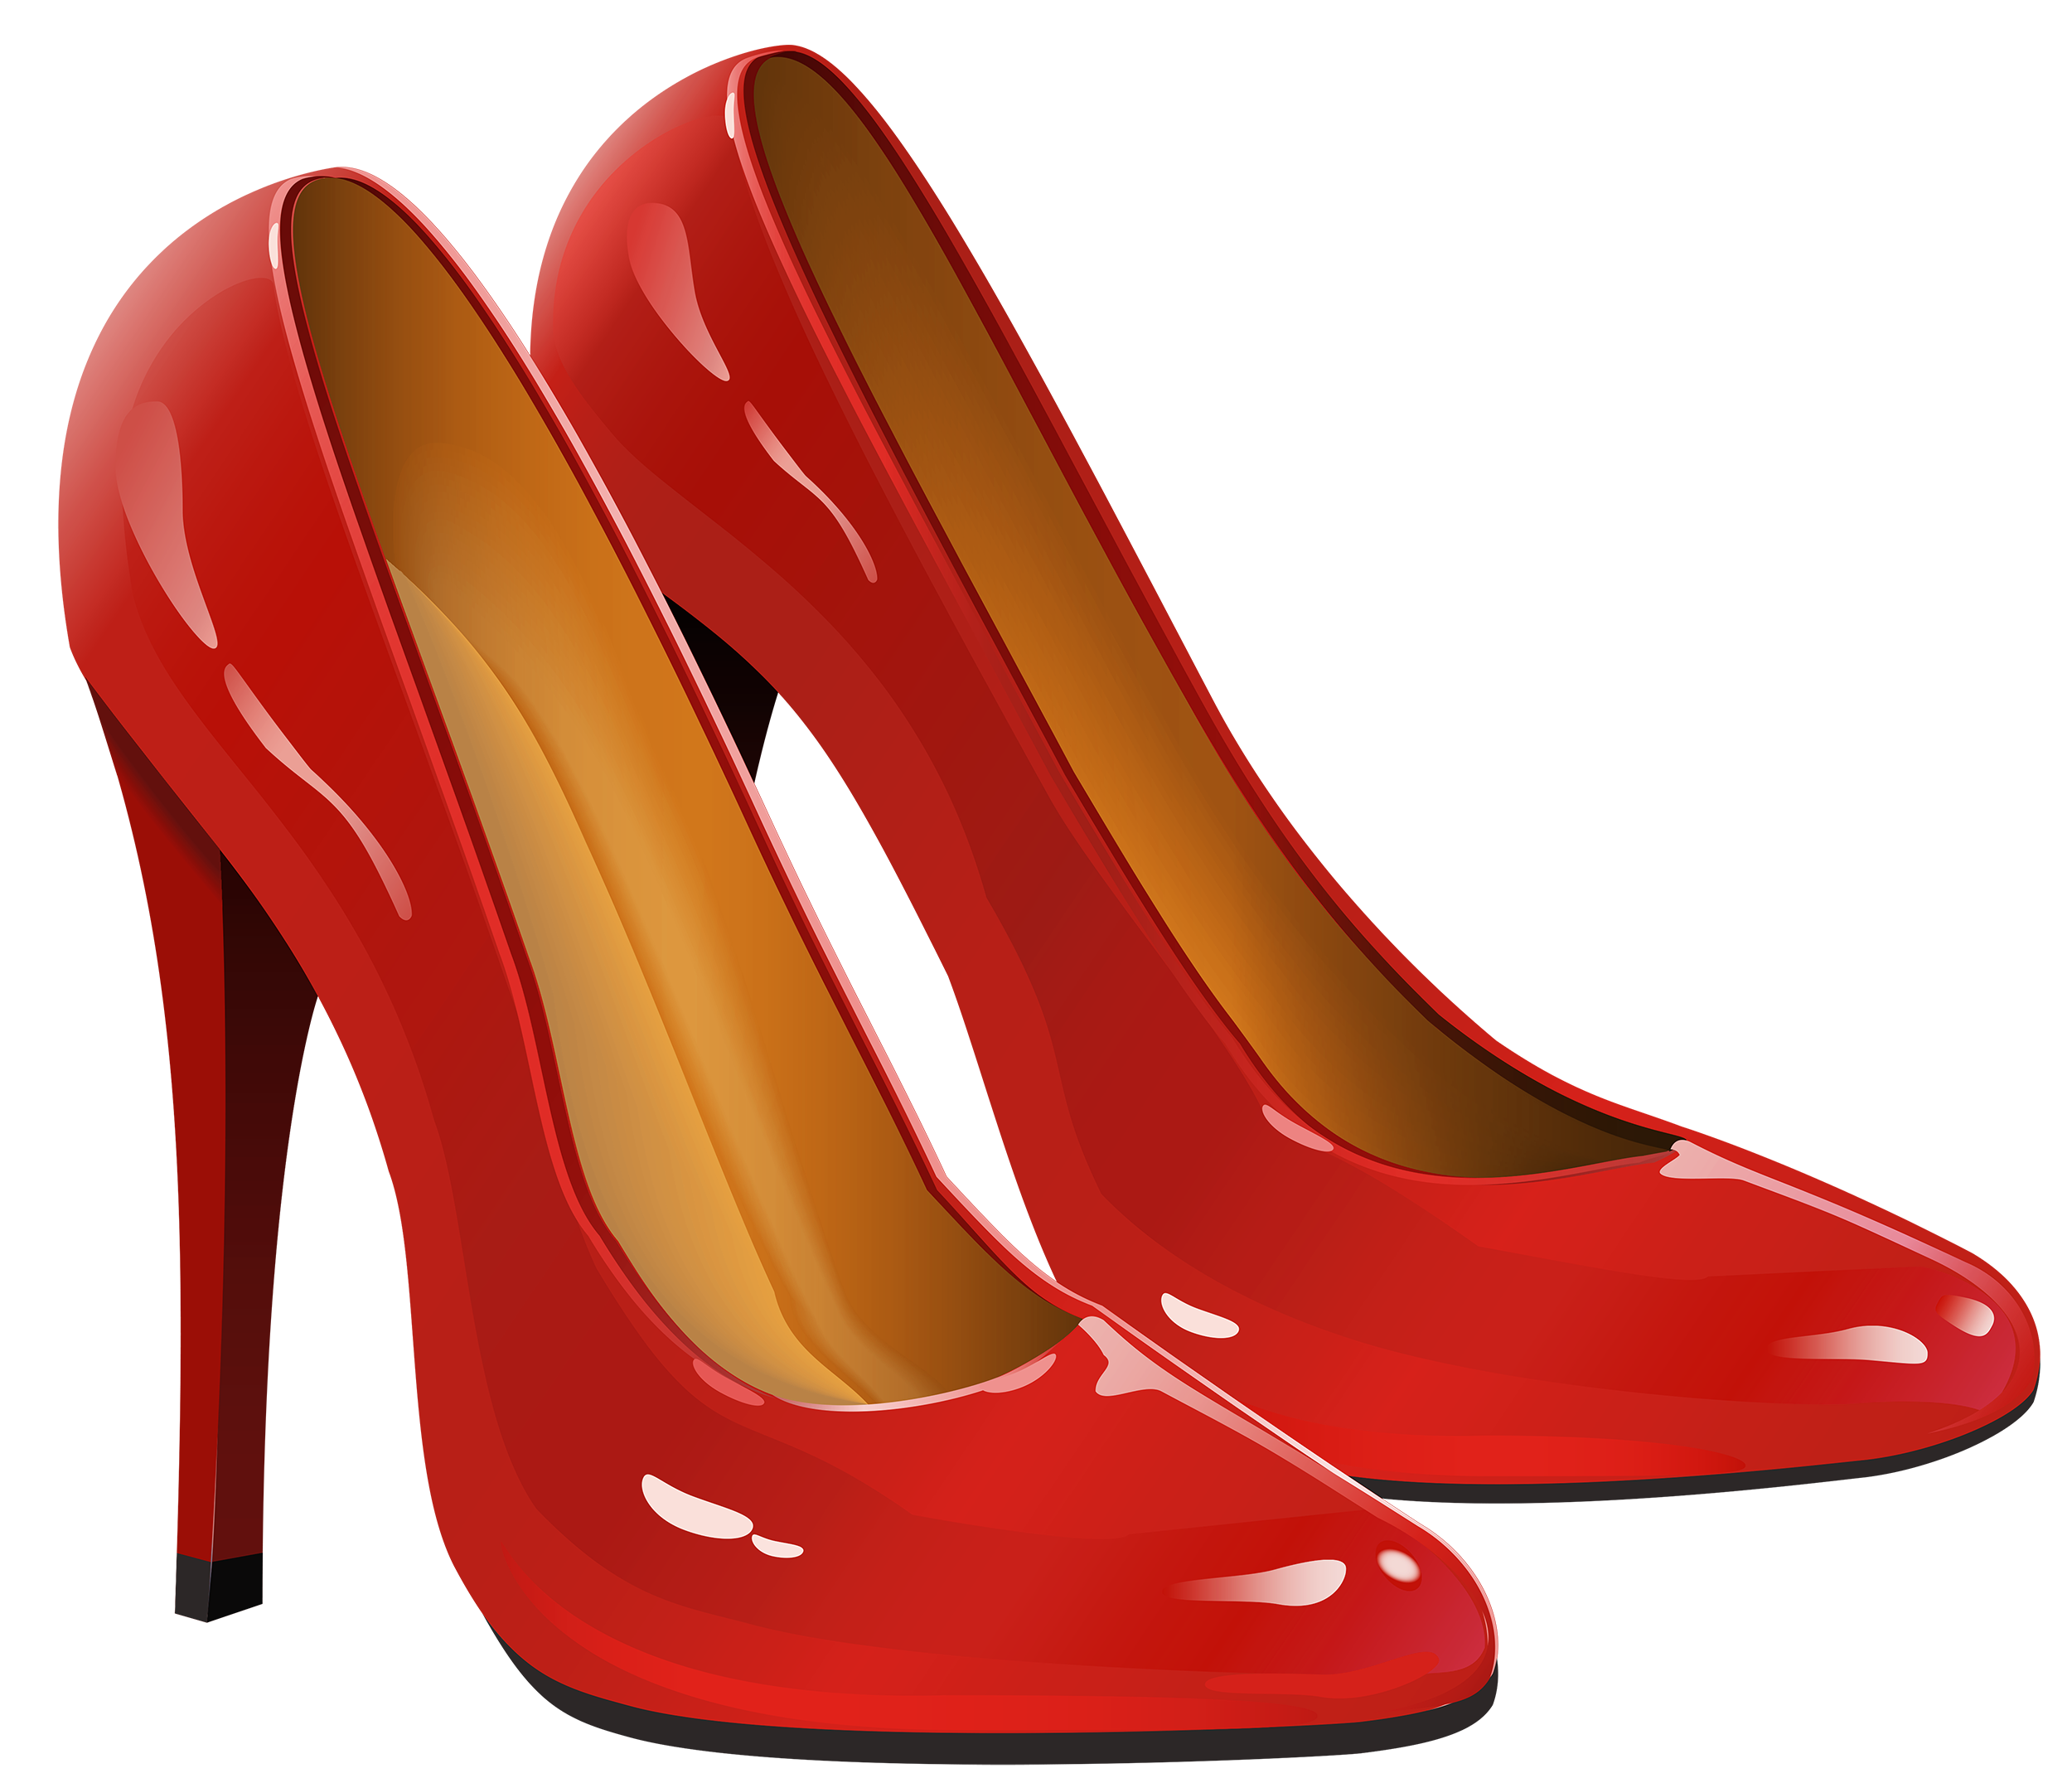 High Heel Clipart Free Graphic by Free Graphic Bundles · Creative Fabrica